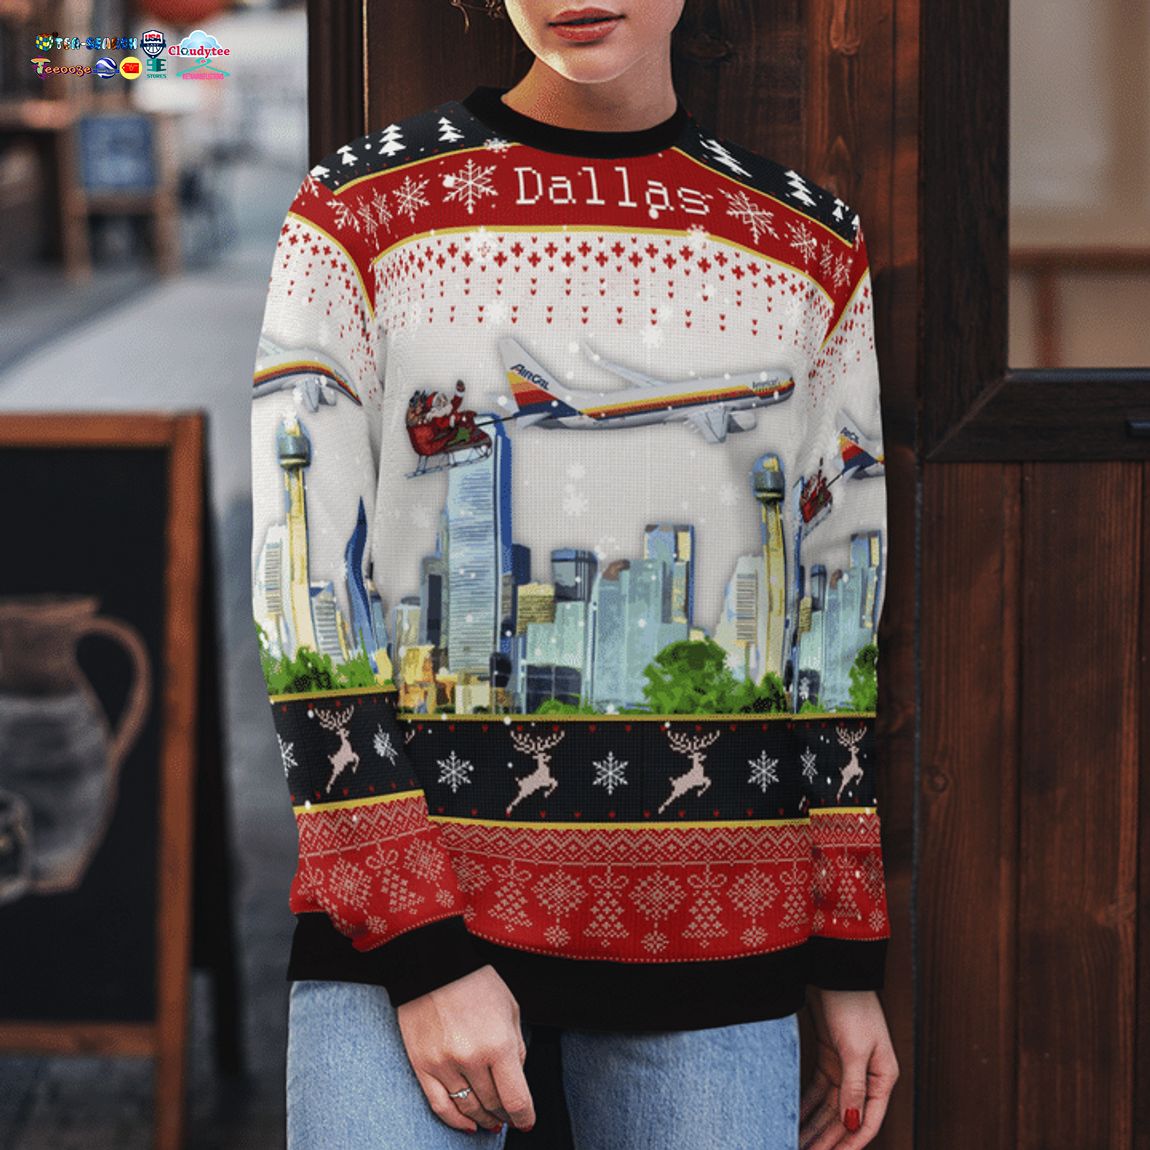 American Airlines AirCal Heritage With Santa Over Dallas 3D Christmas Sweater